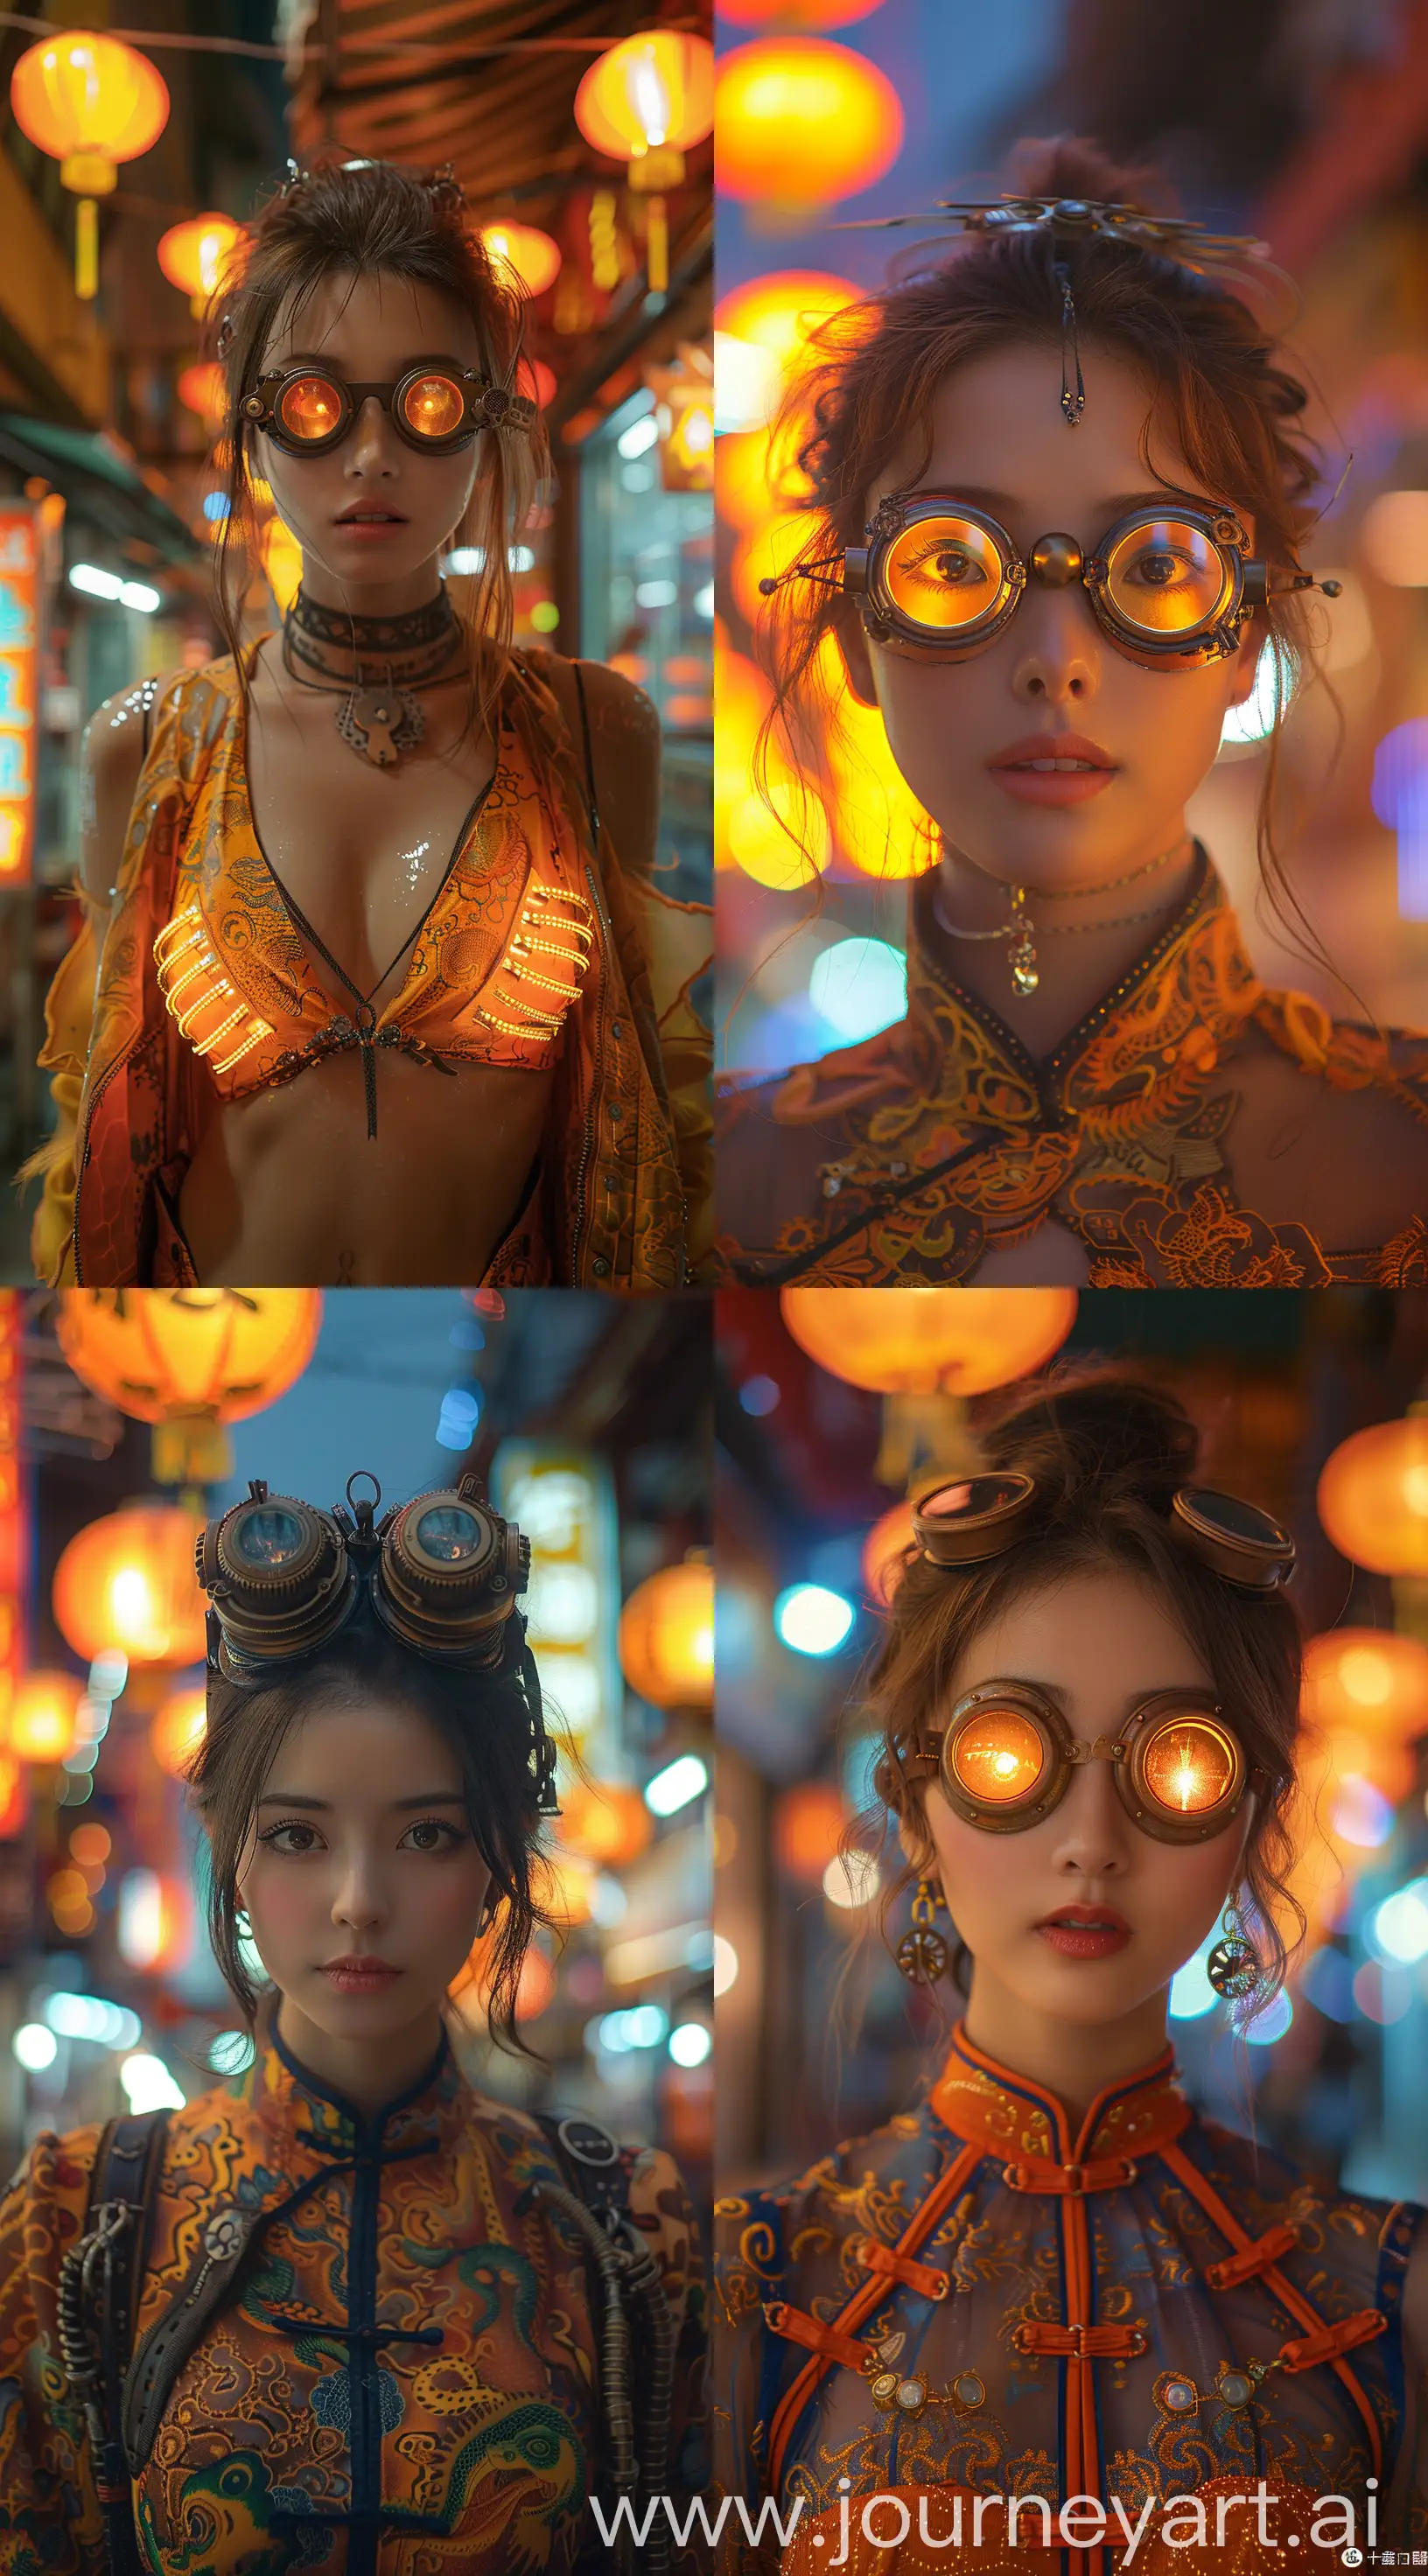 Futuristic-Steampunk-Street-Fashion-Portrait-at-Night-with-Chinese-Cultural-Themes